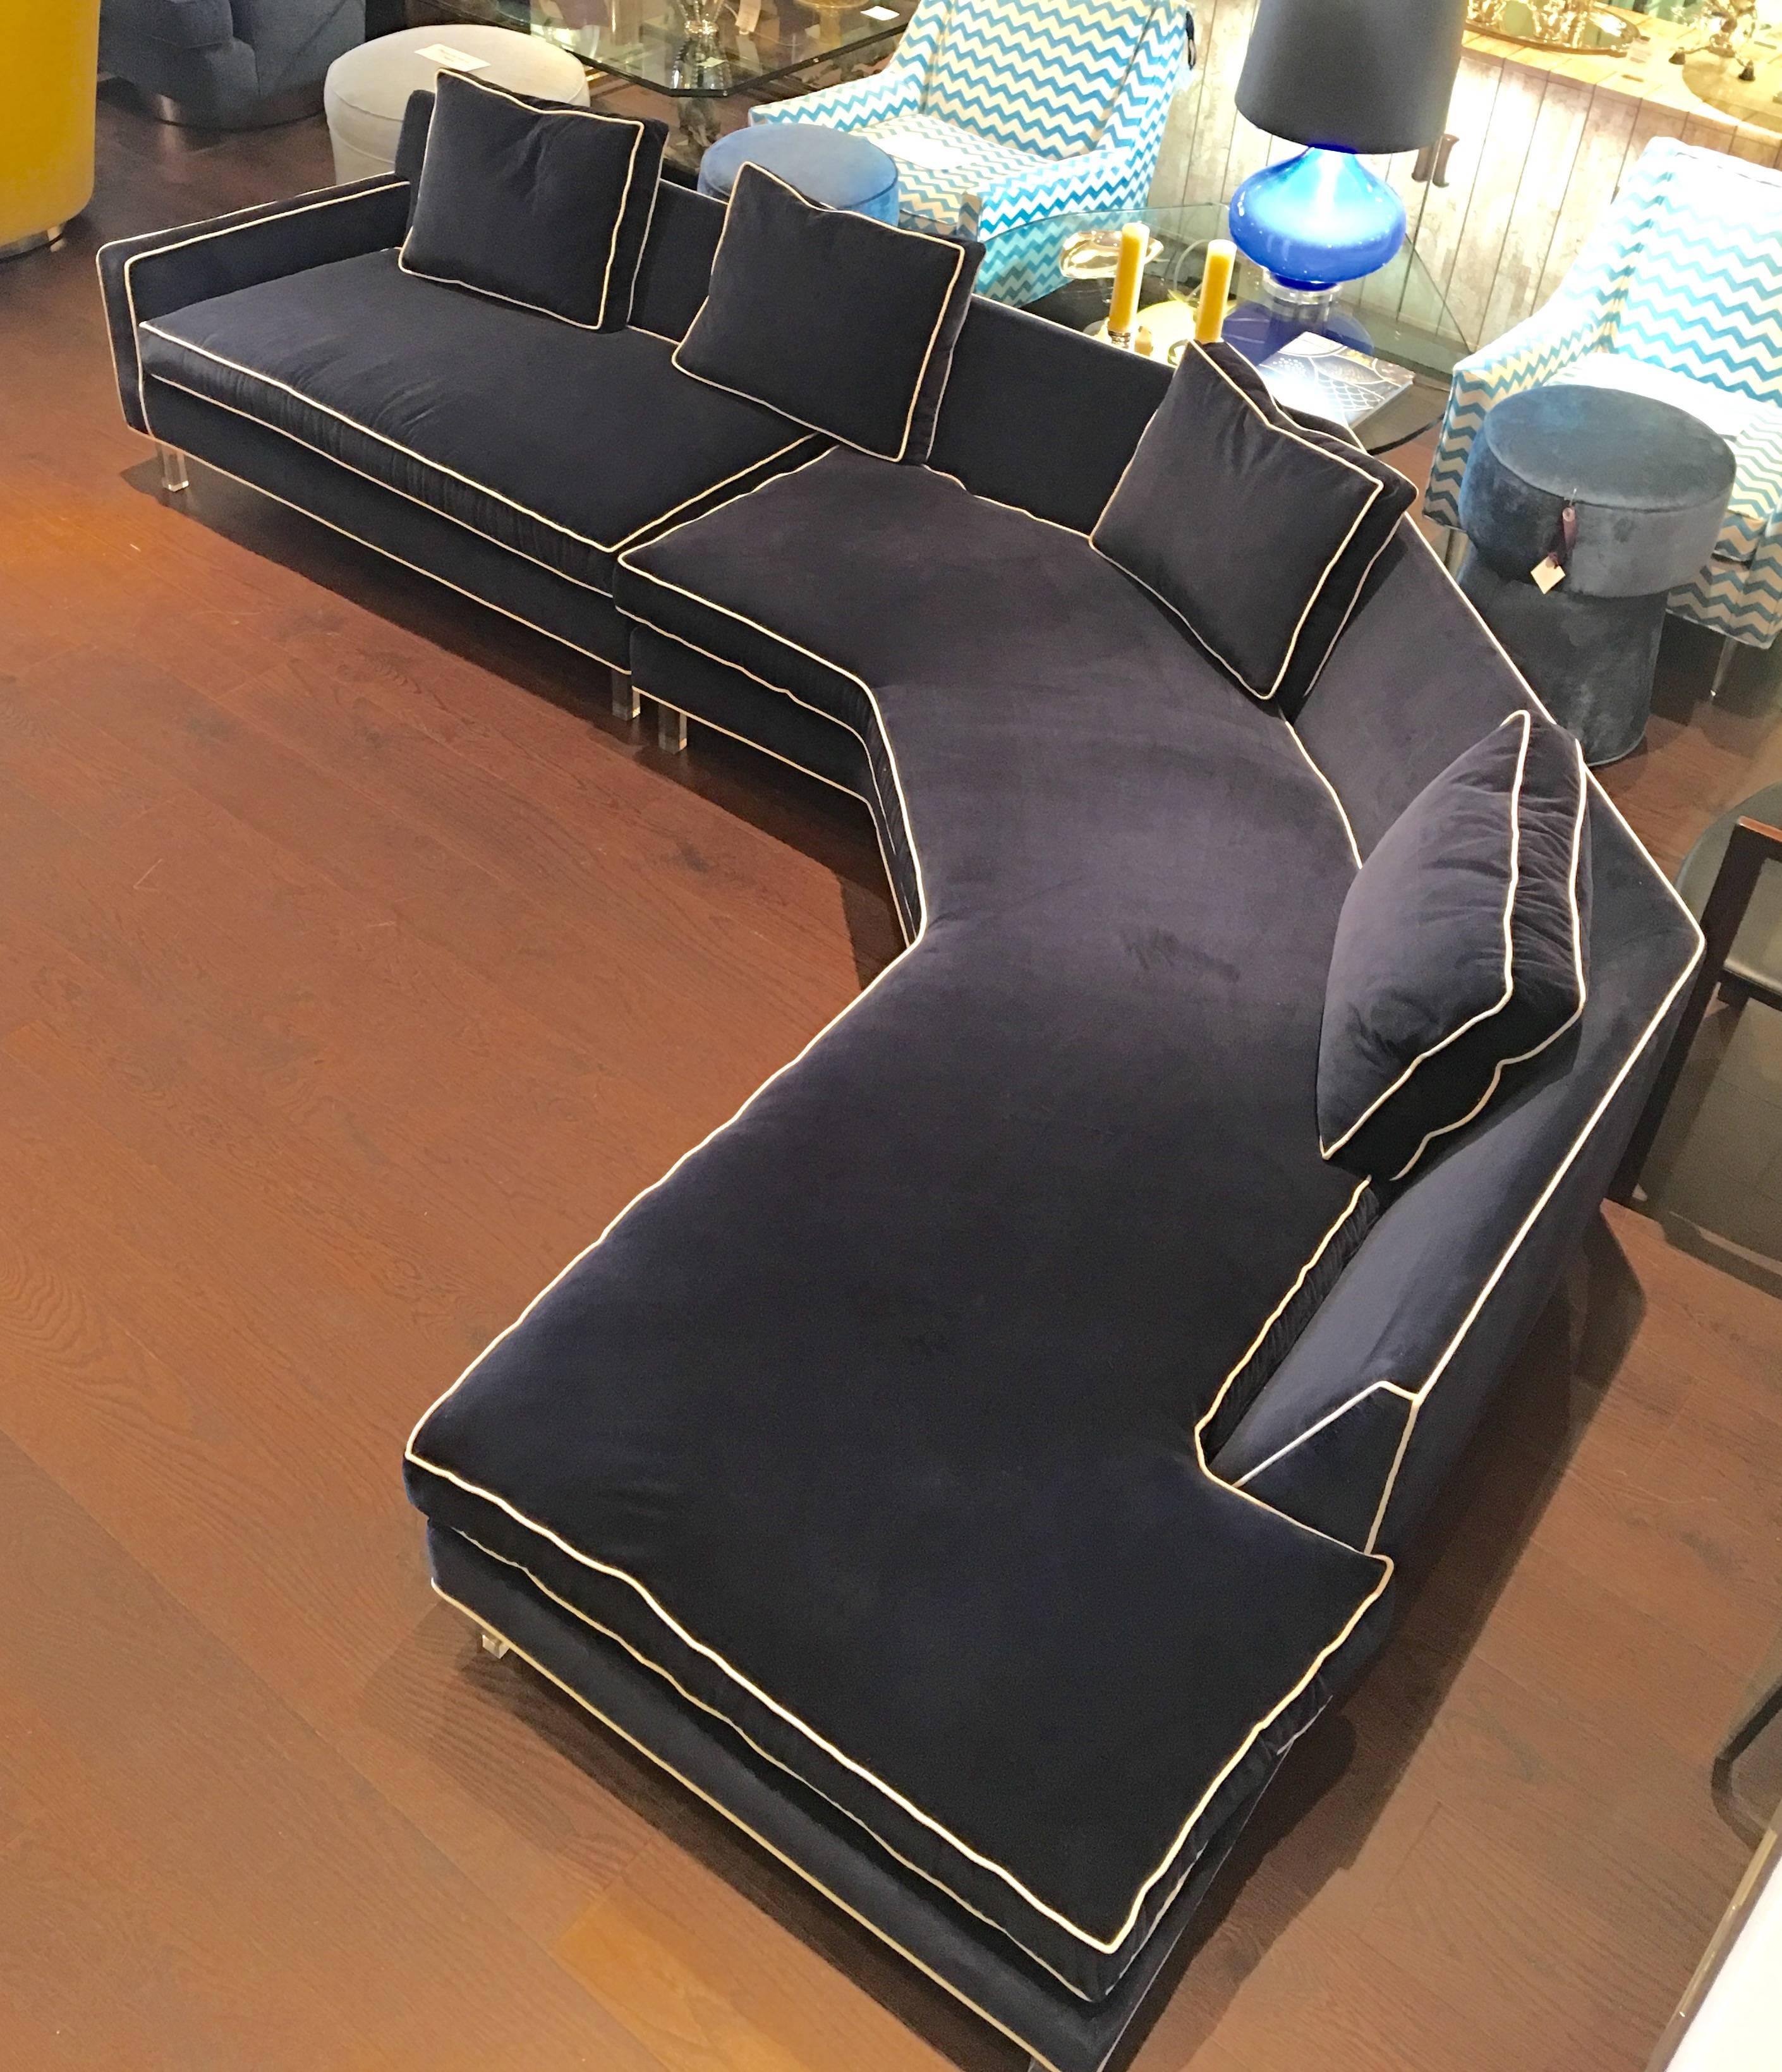 Very stylish two-piece sectional sofa newly upholstered in blue velvet fabric with white piping, circa 1970.